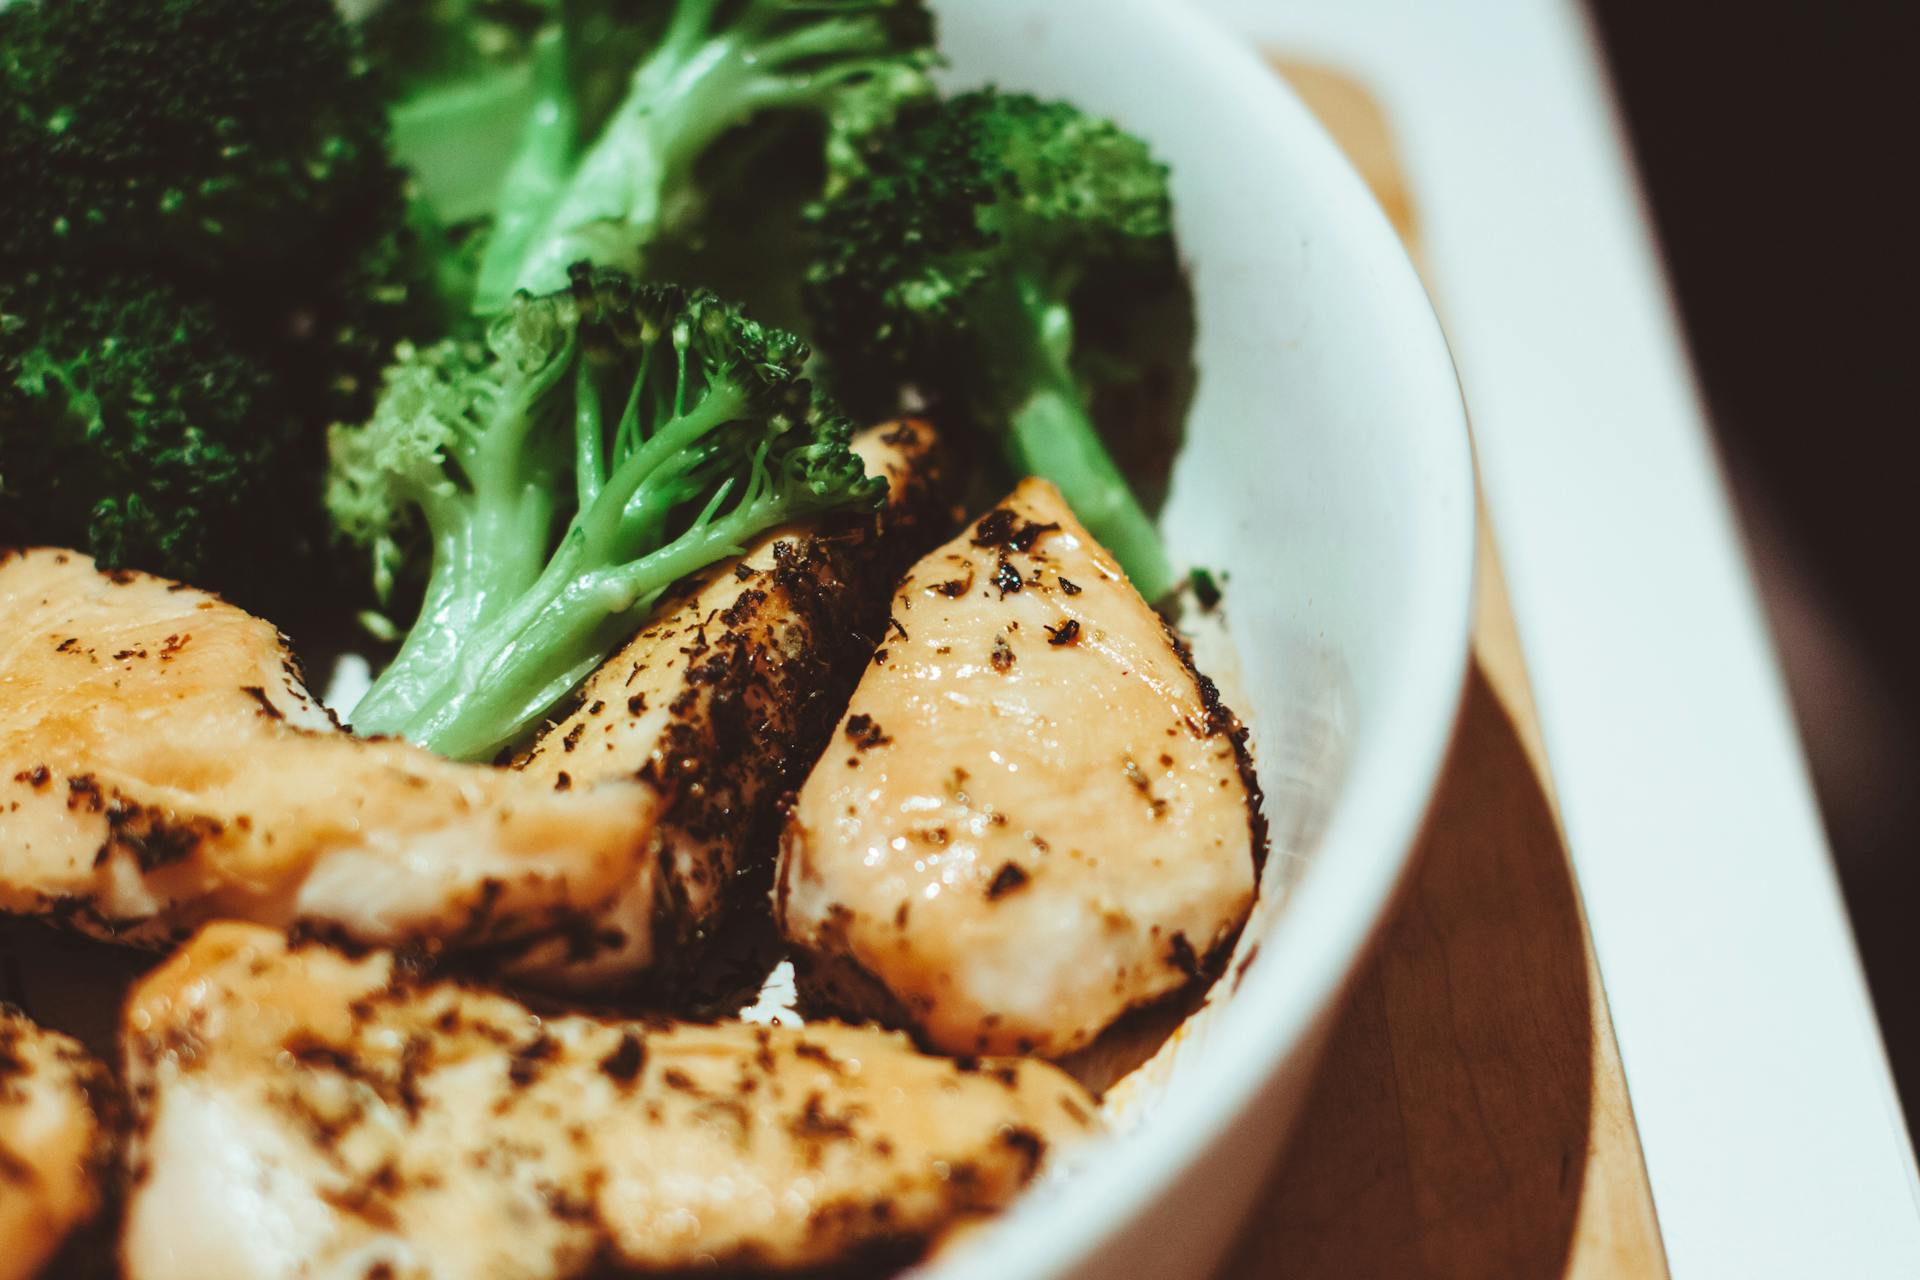 Chicken and broccoli on a plate | Source: Pexels